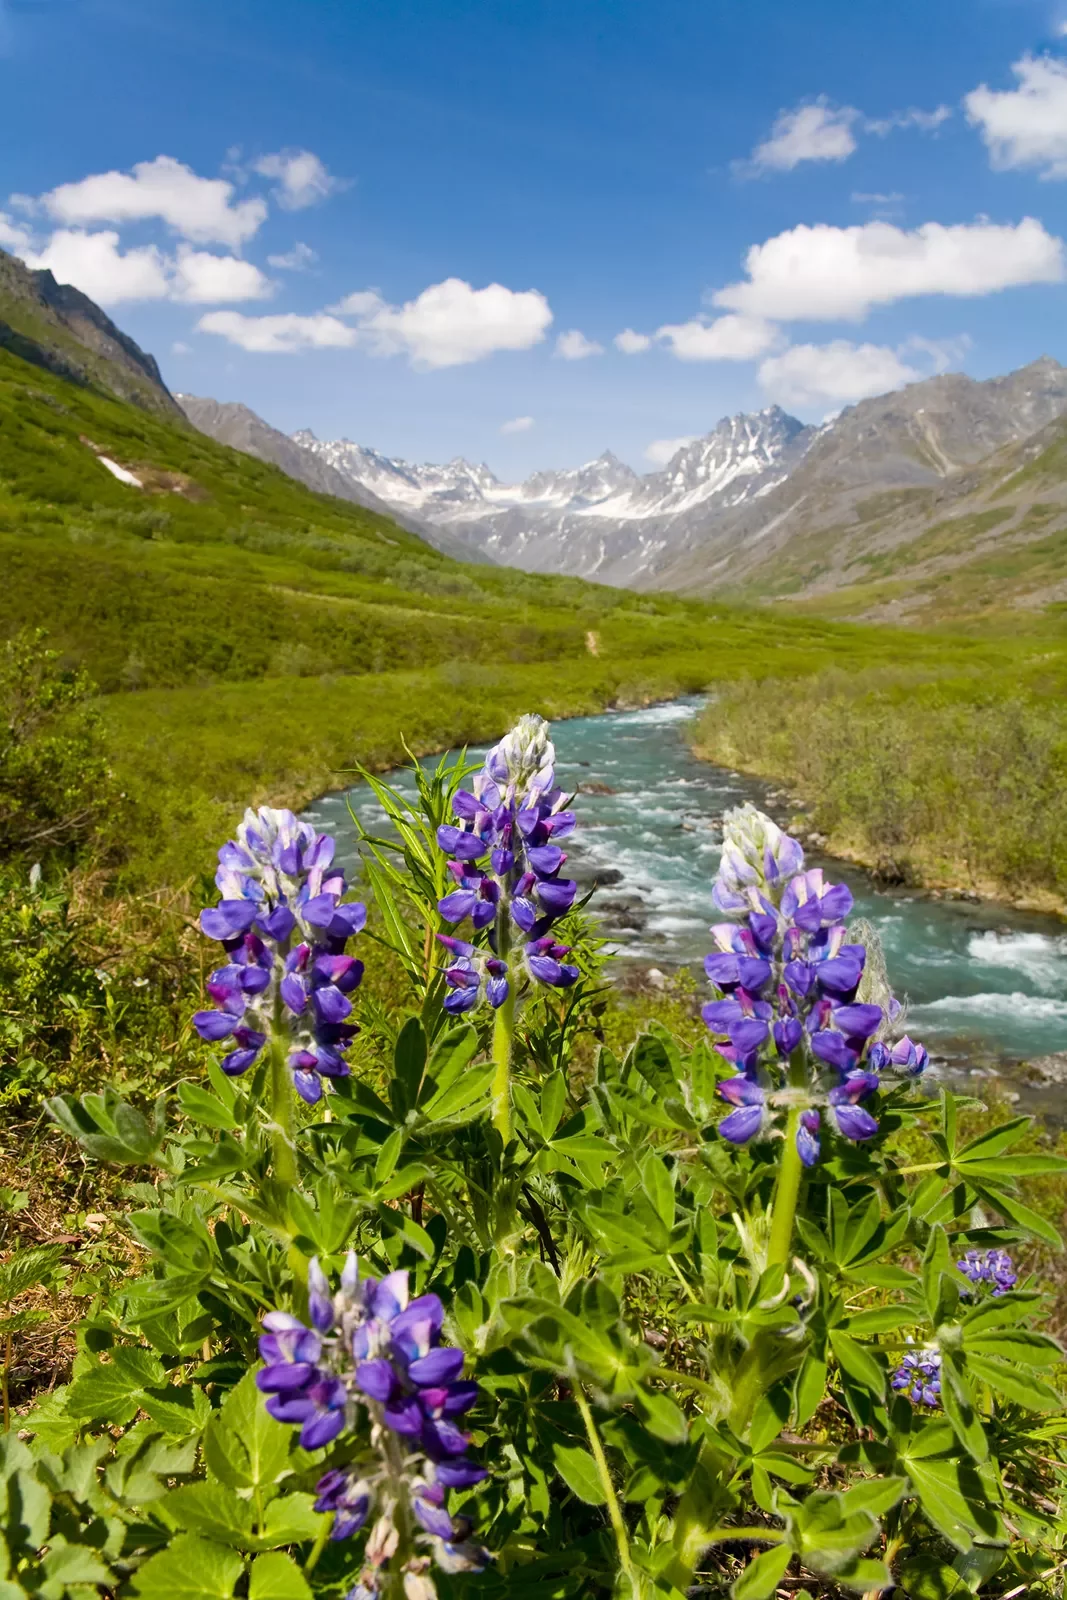 Field of purple flowers with mountains in the background